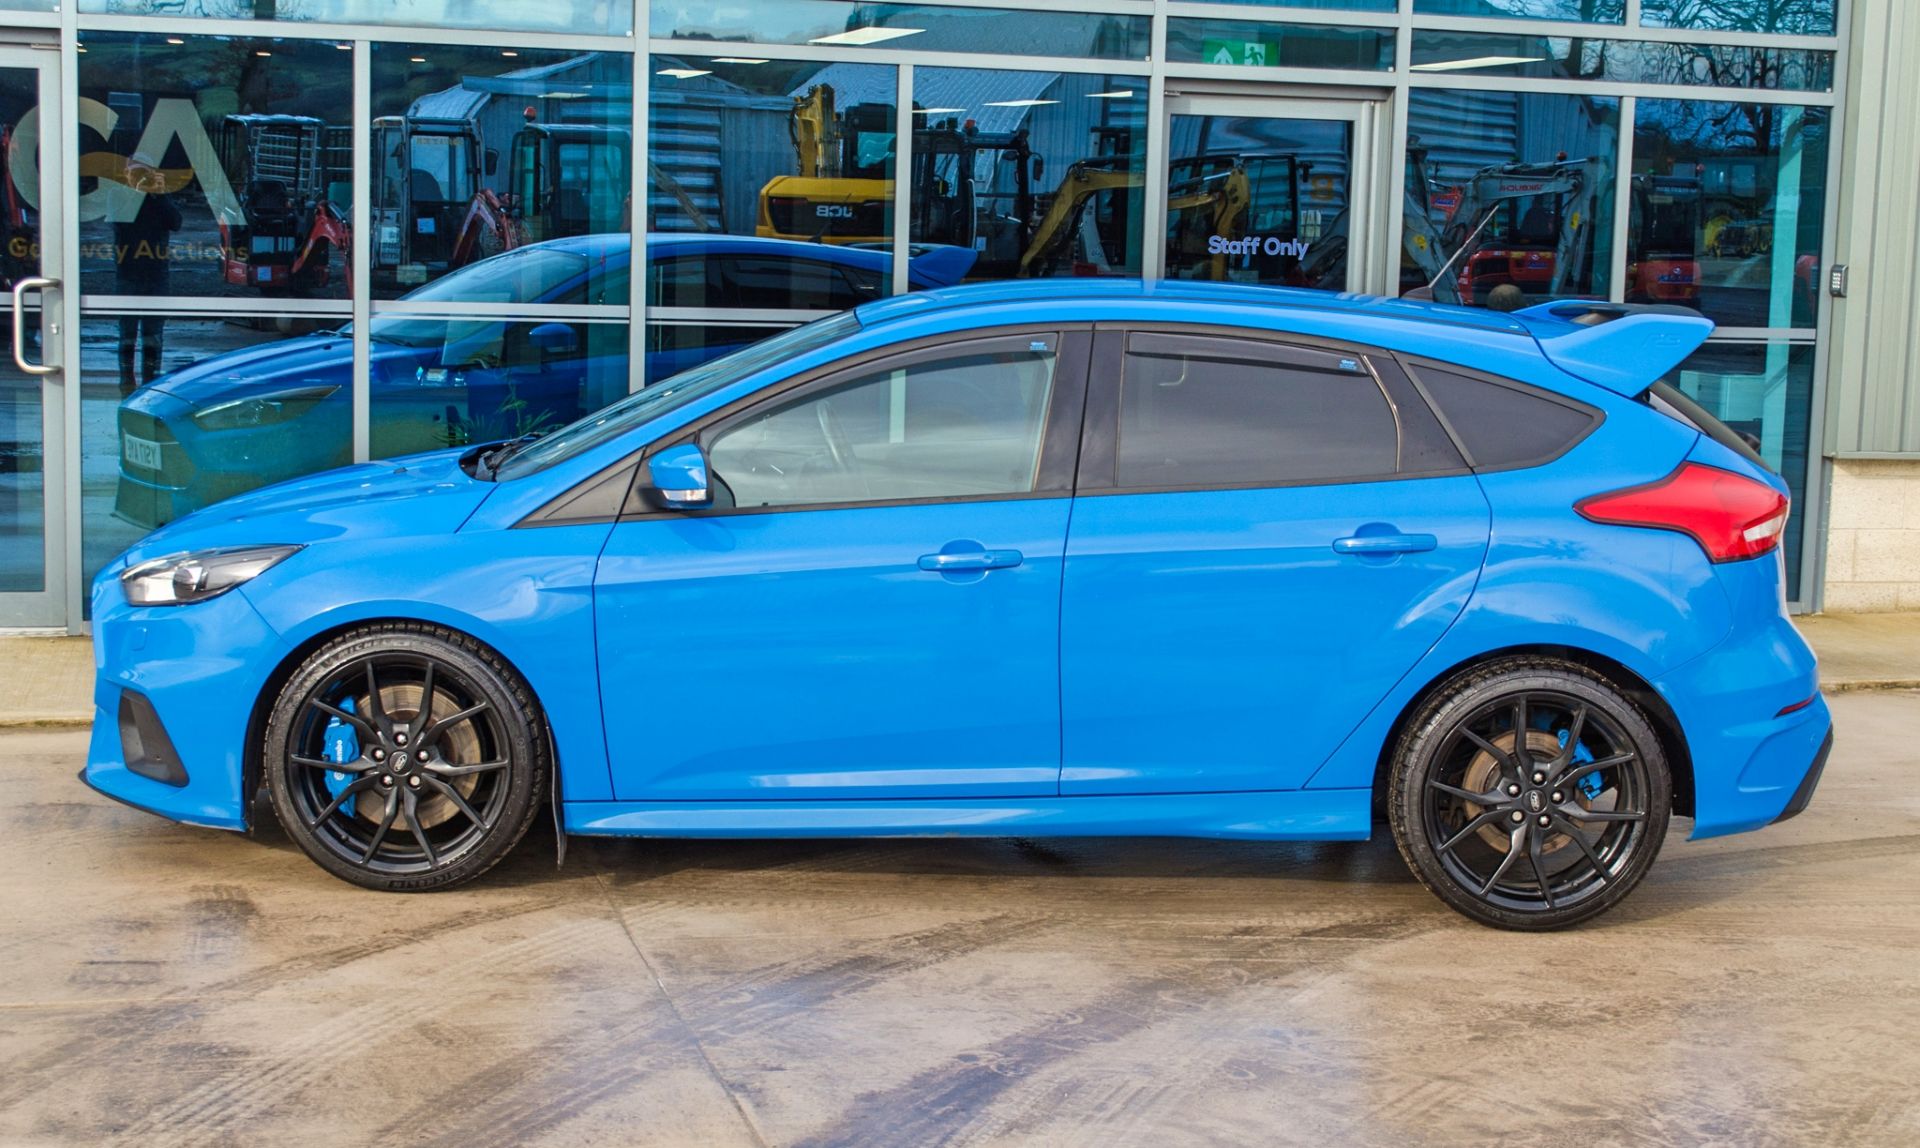 2017 Ford Focus 2.3 RS 5 door hatch back - Image 16 of 56